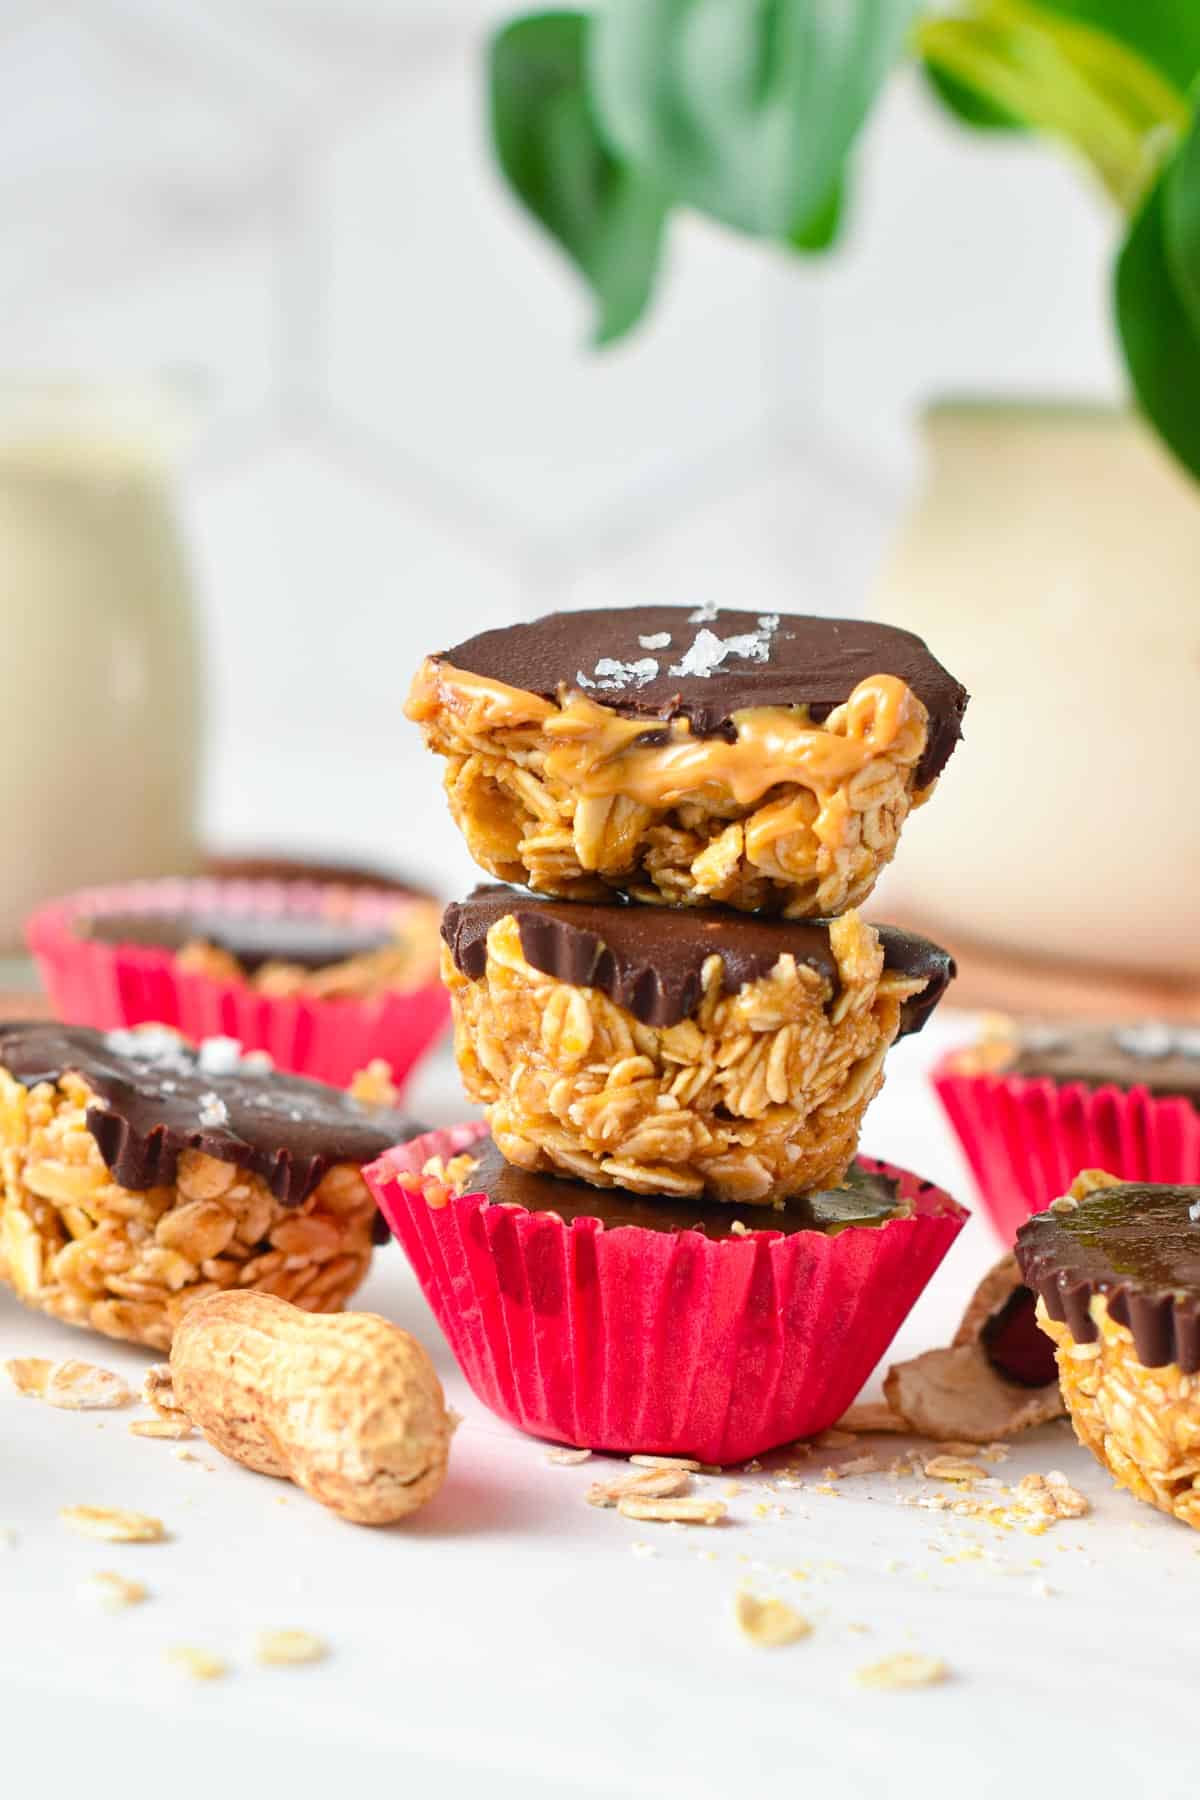 A stack of three no-bake peanut butter oat cups with the one on top half cut showing the runny peanut butter filling.
/ta